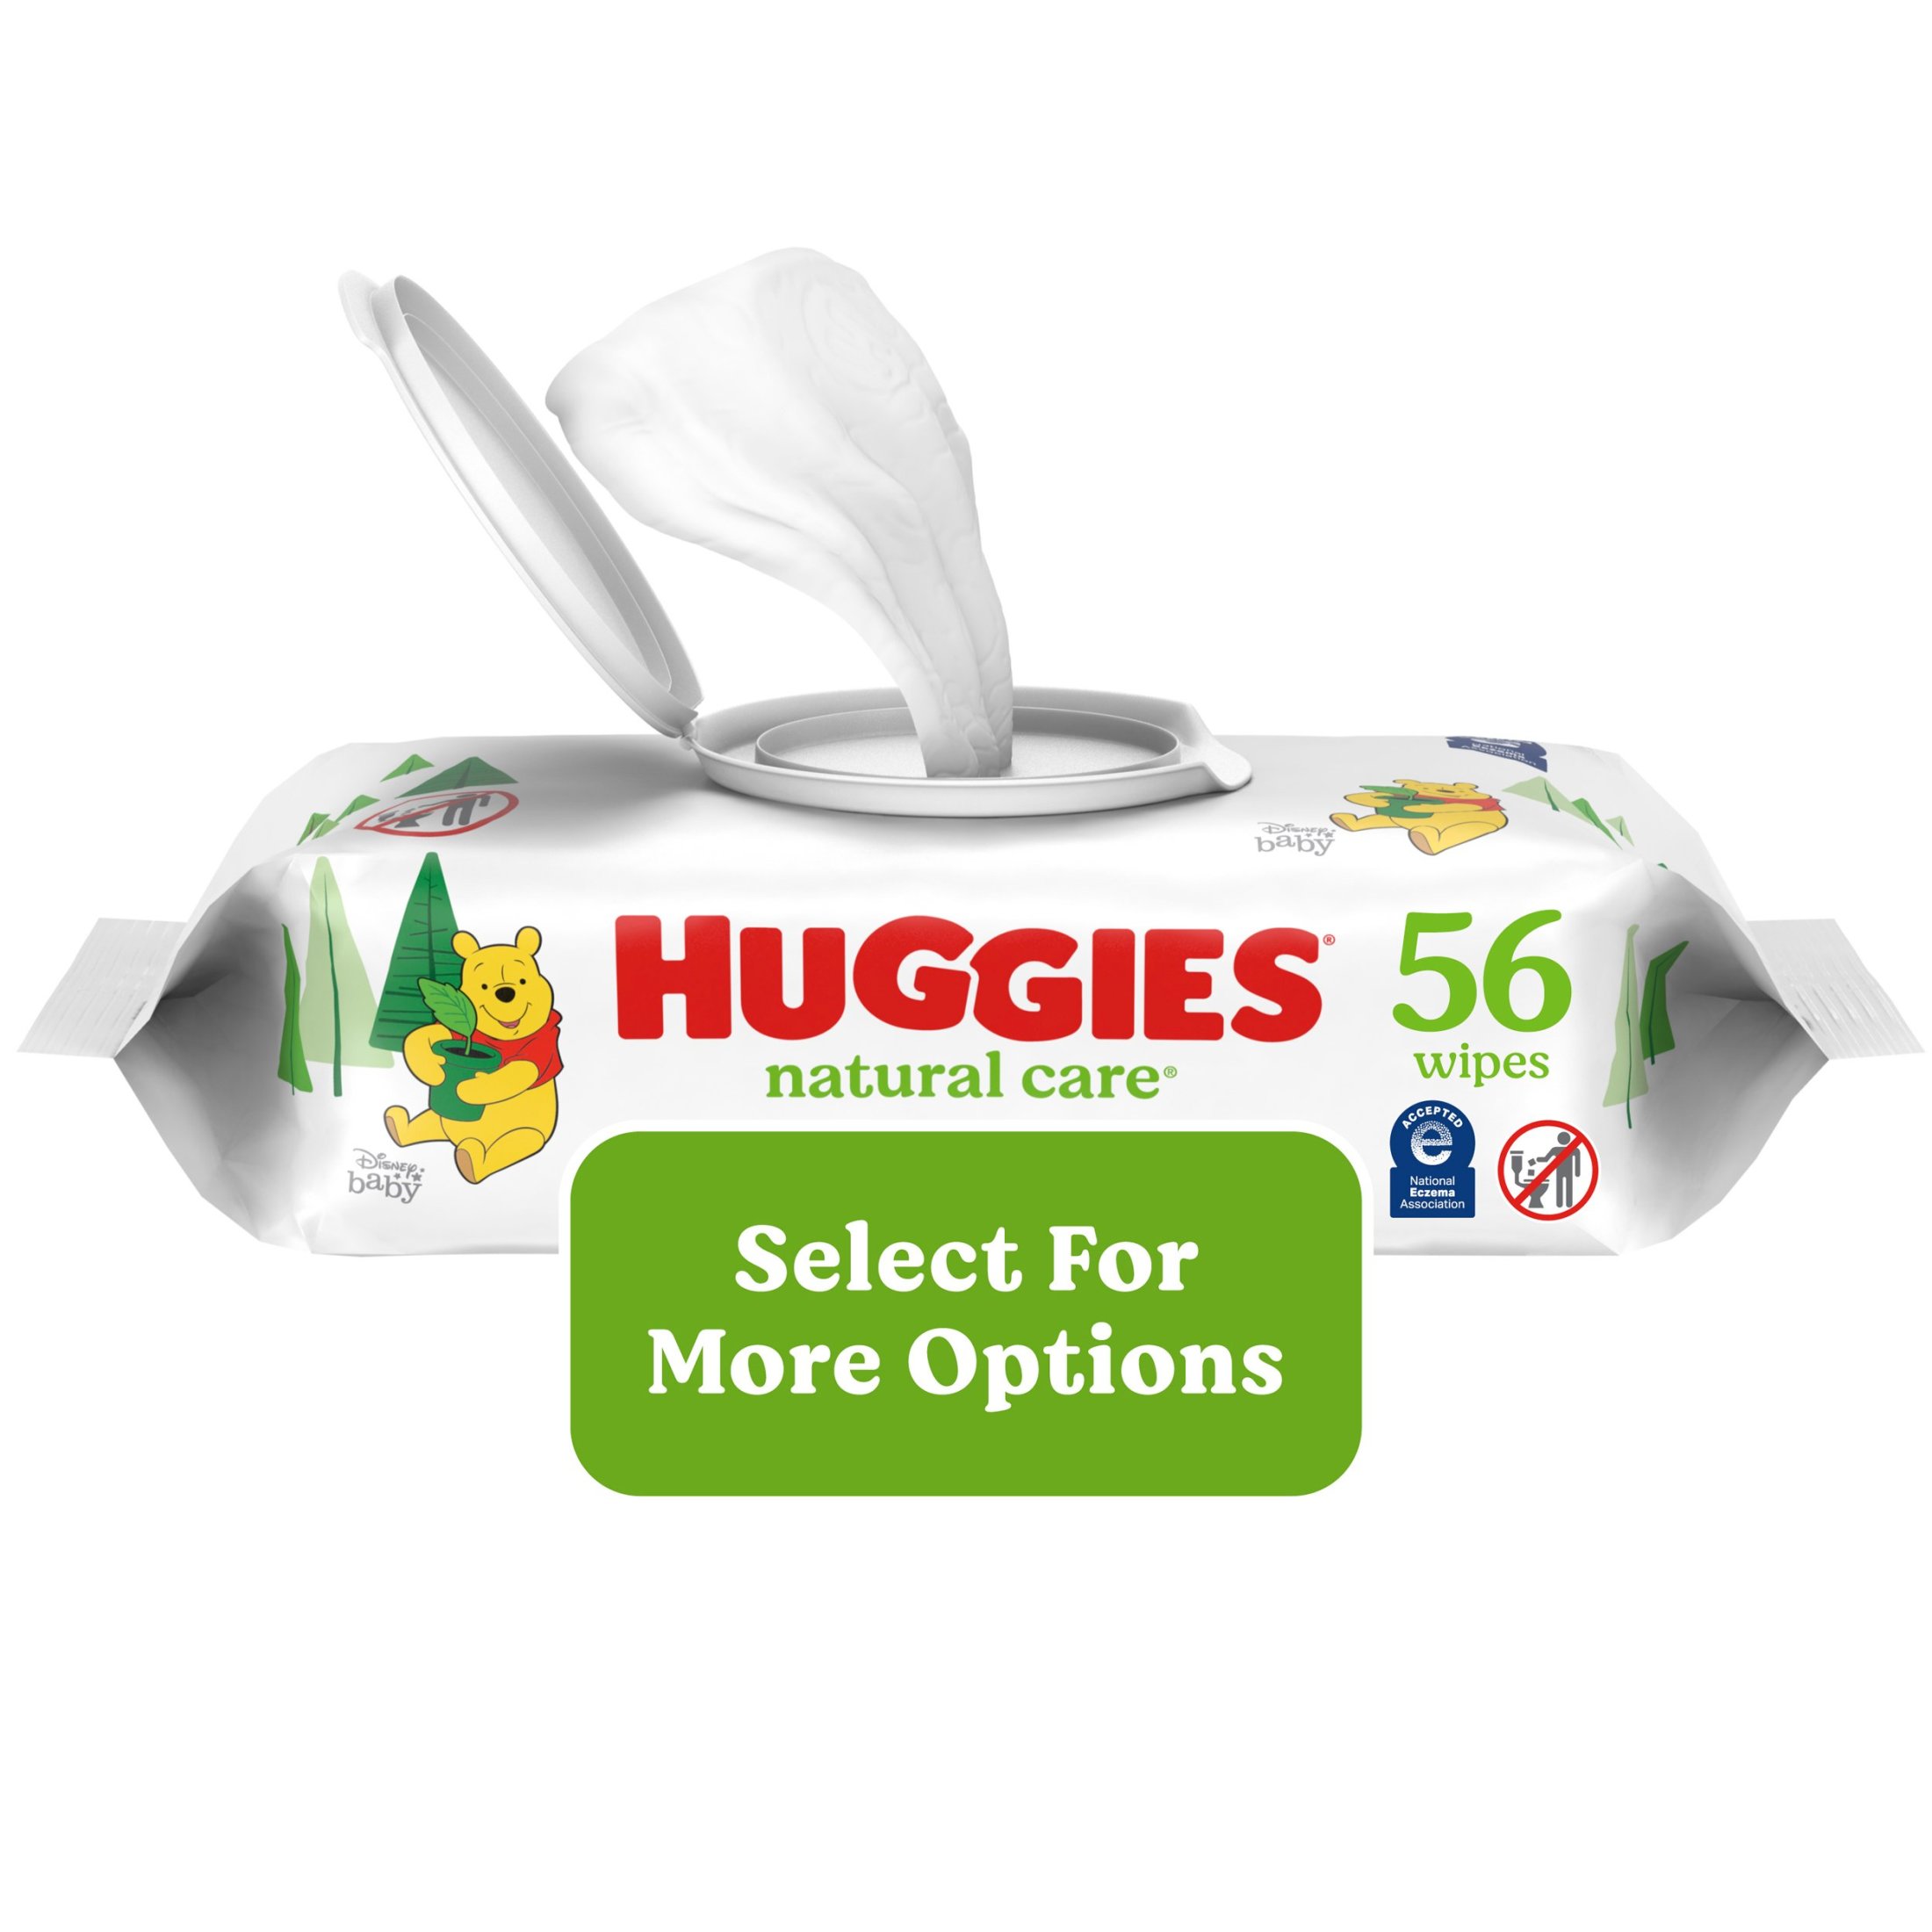 Huggies Natural Care Sensitive Baby Wipes, Unscented, 1 Pack, 56 Total Ct (Select for More Options) - image 1 of 13